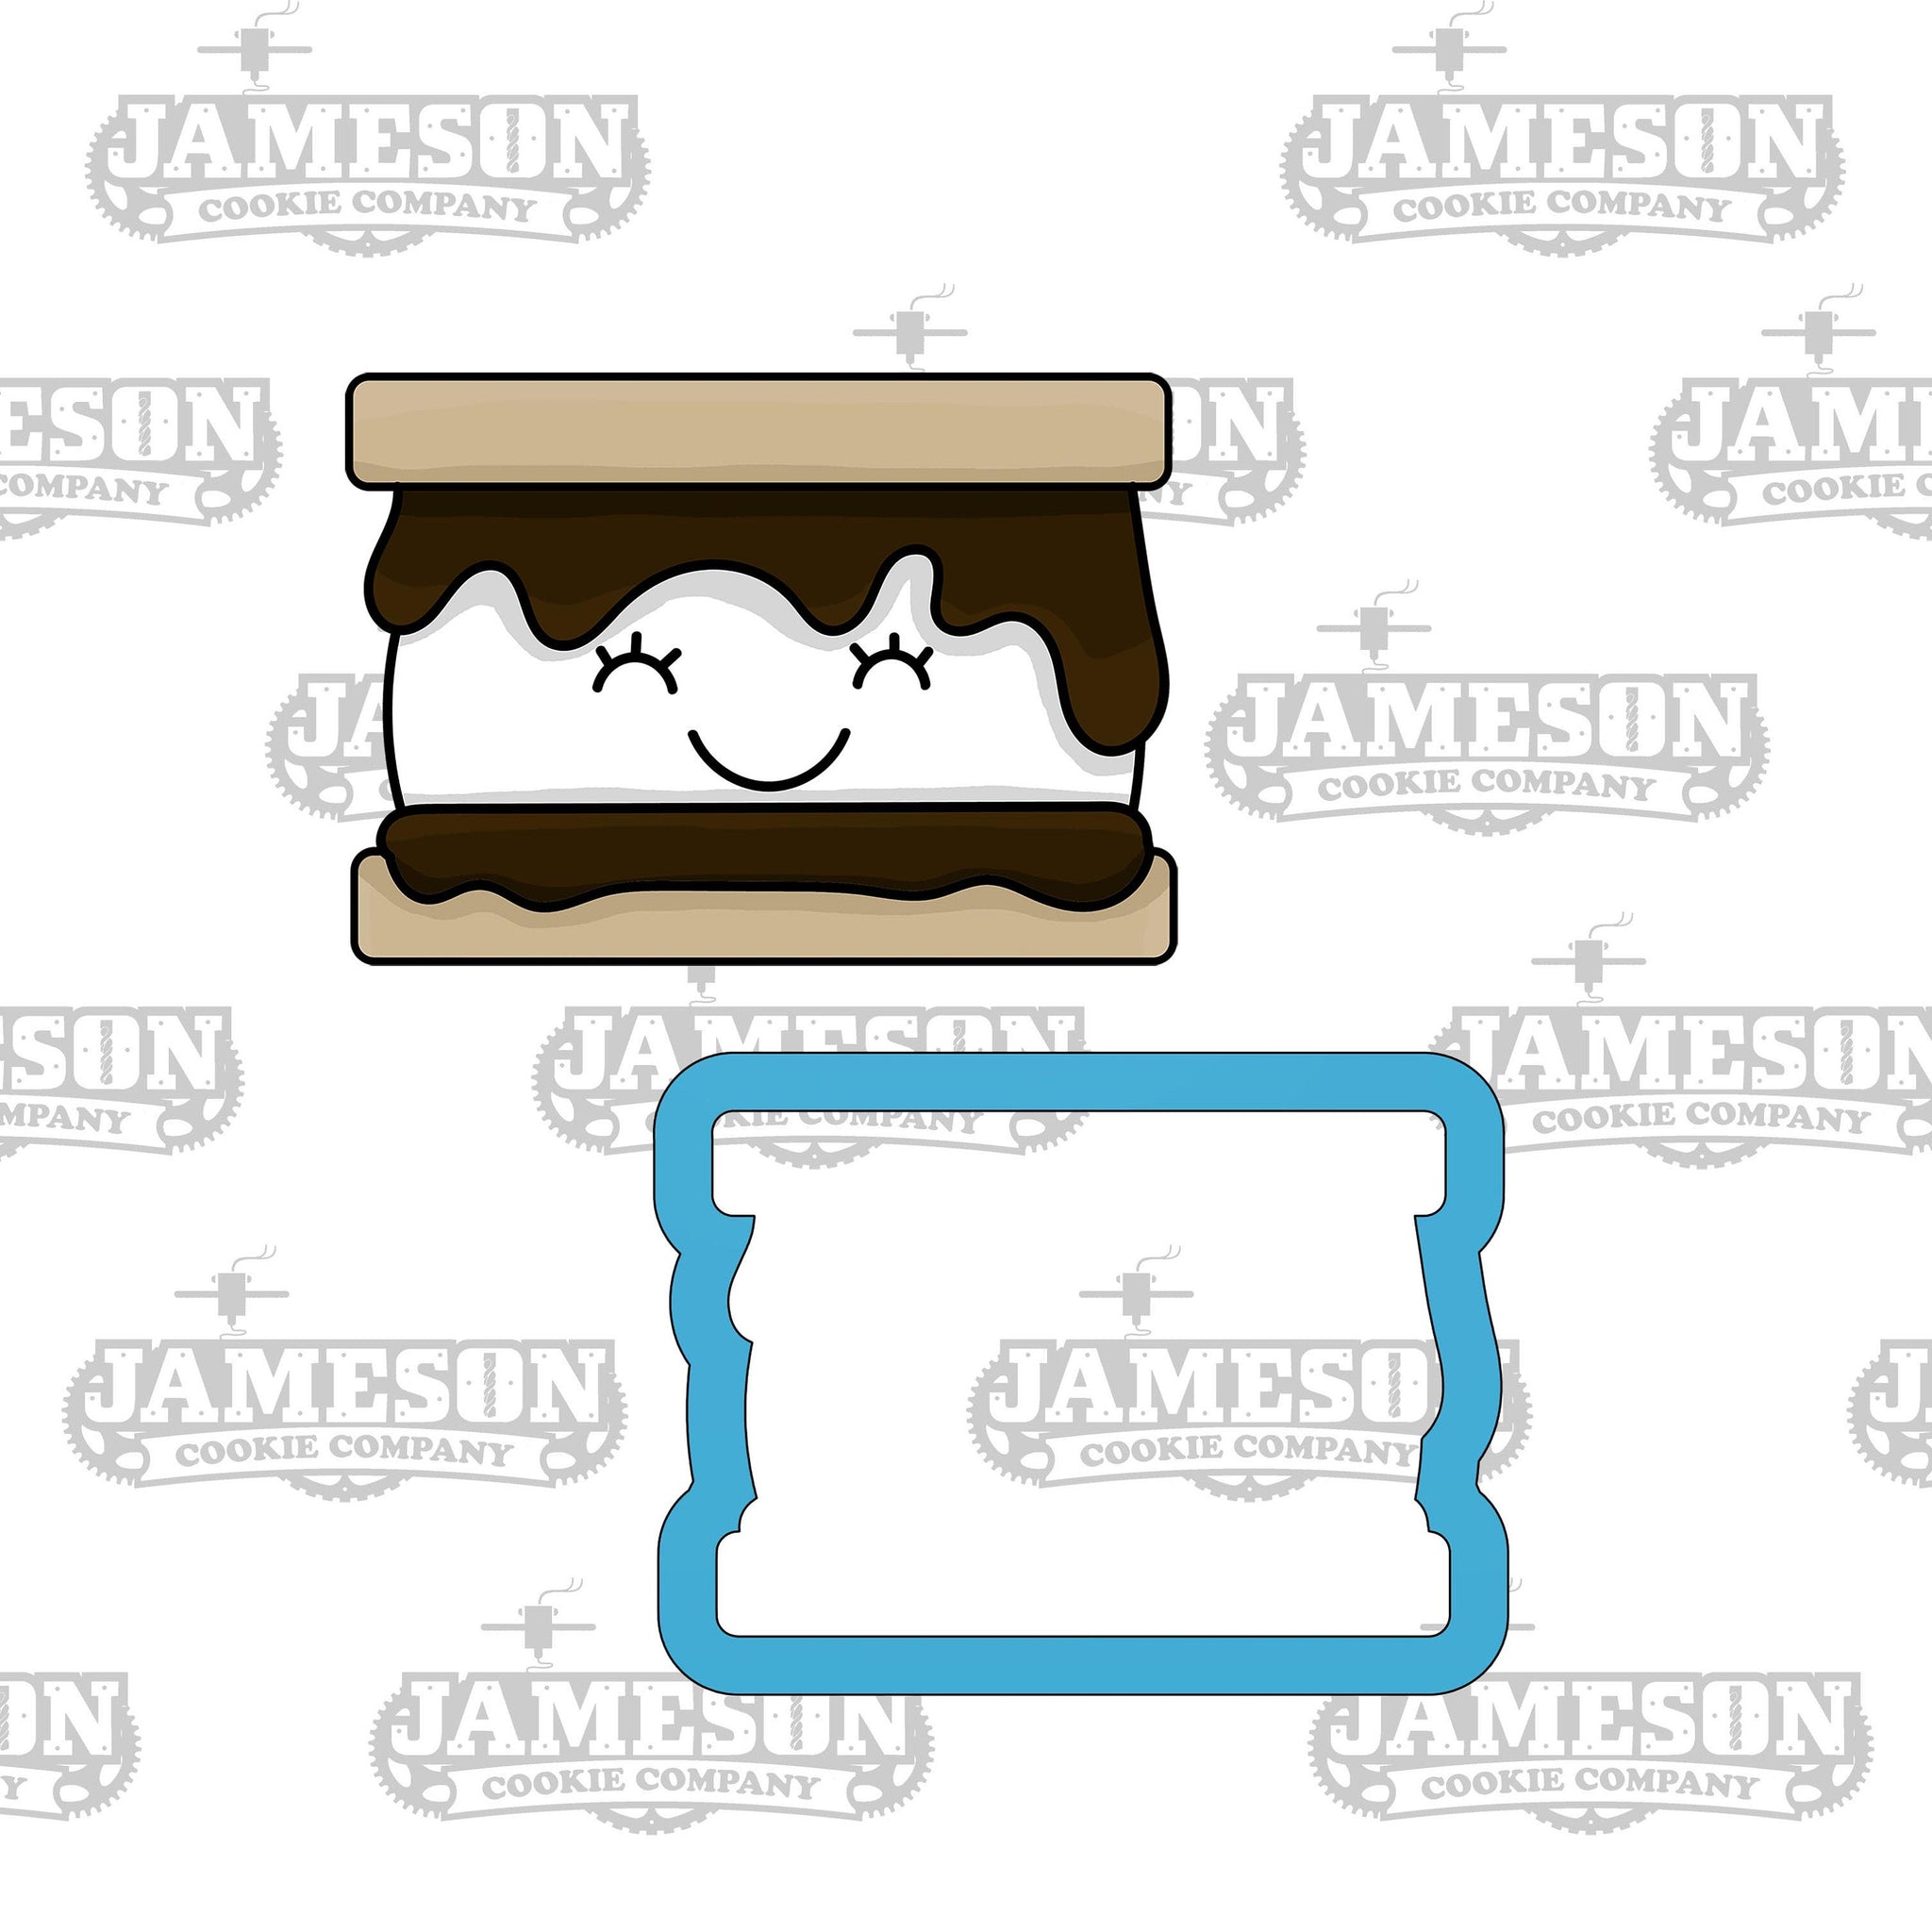 Camping Smore Cookie Cutter - Chubby S'mores Cookie Cutter